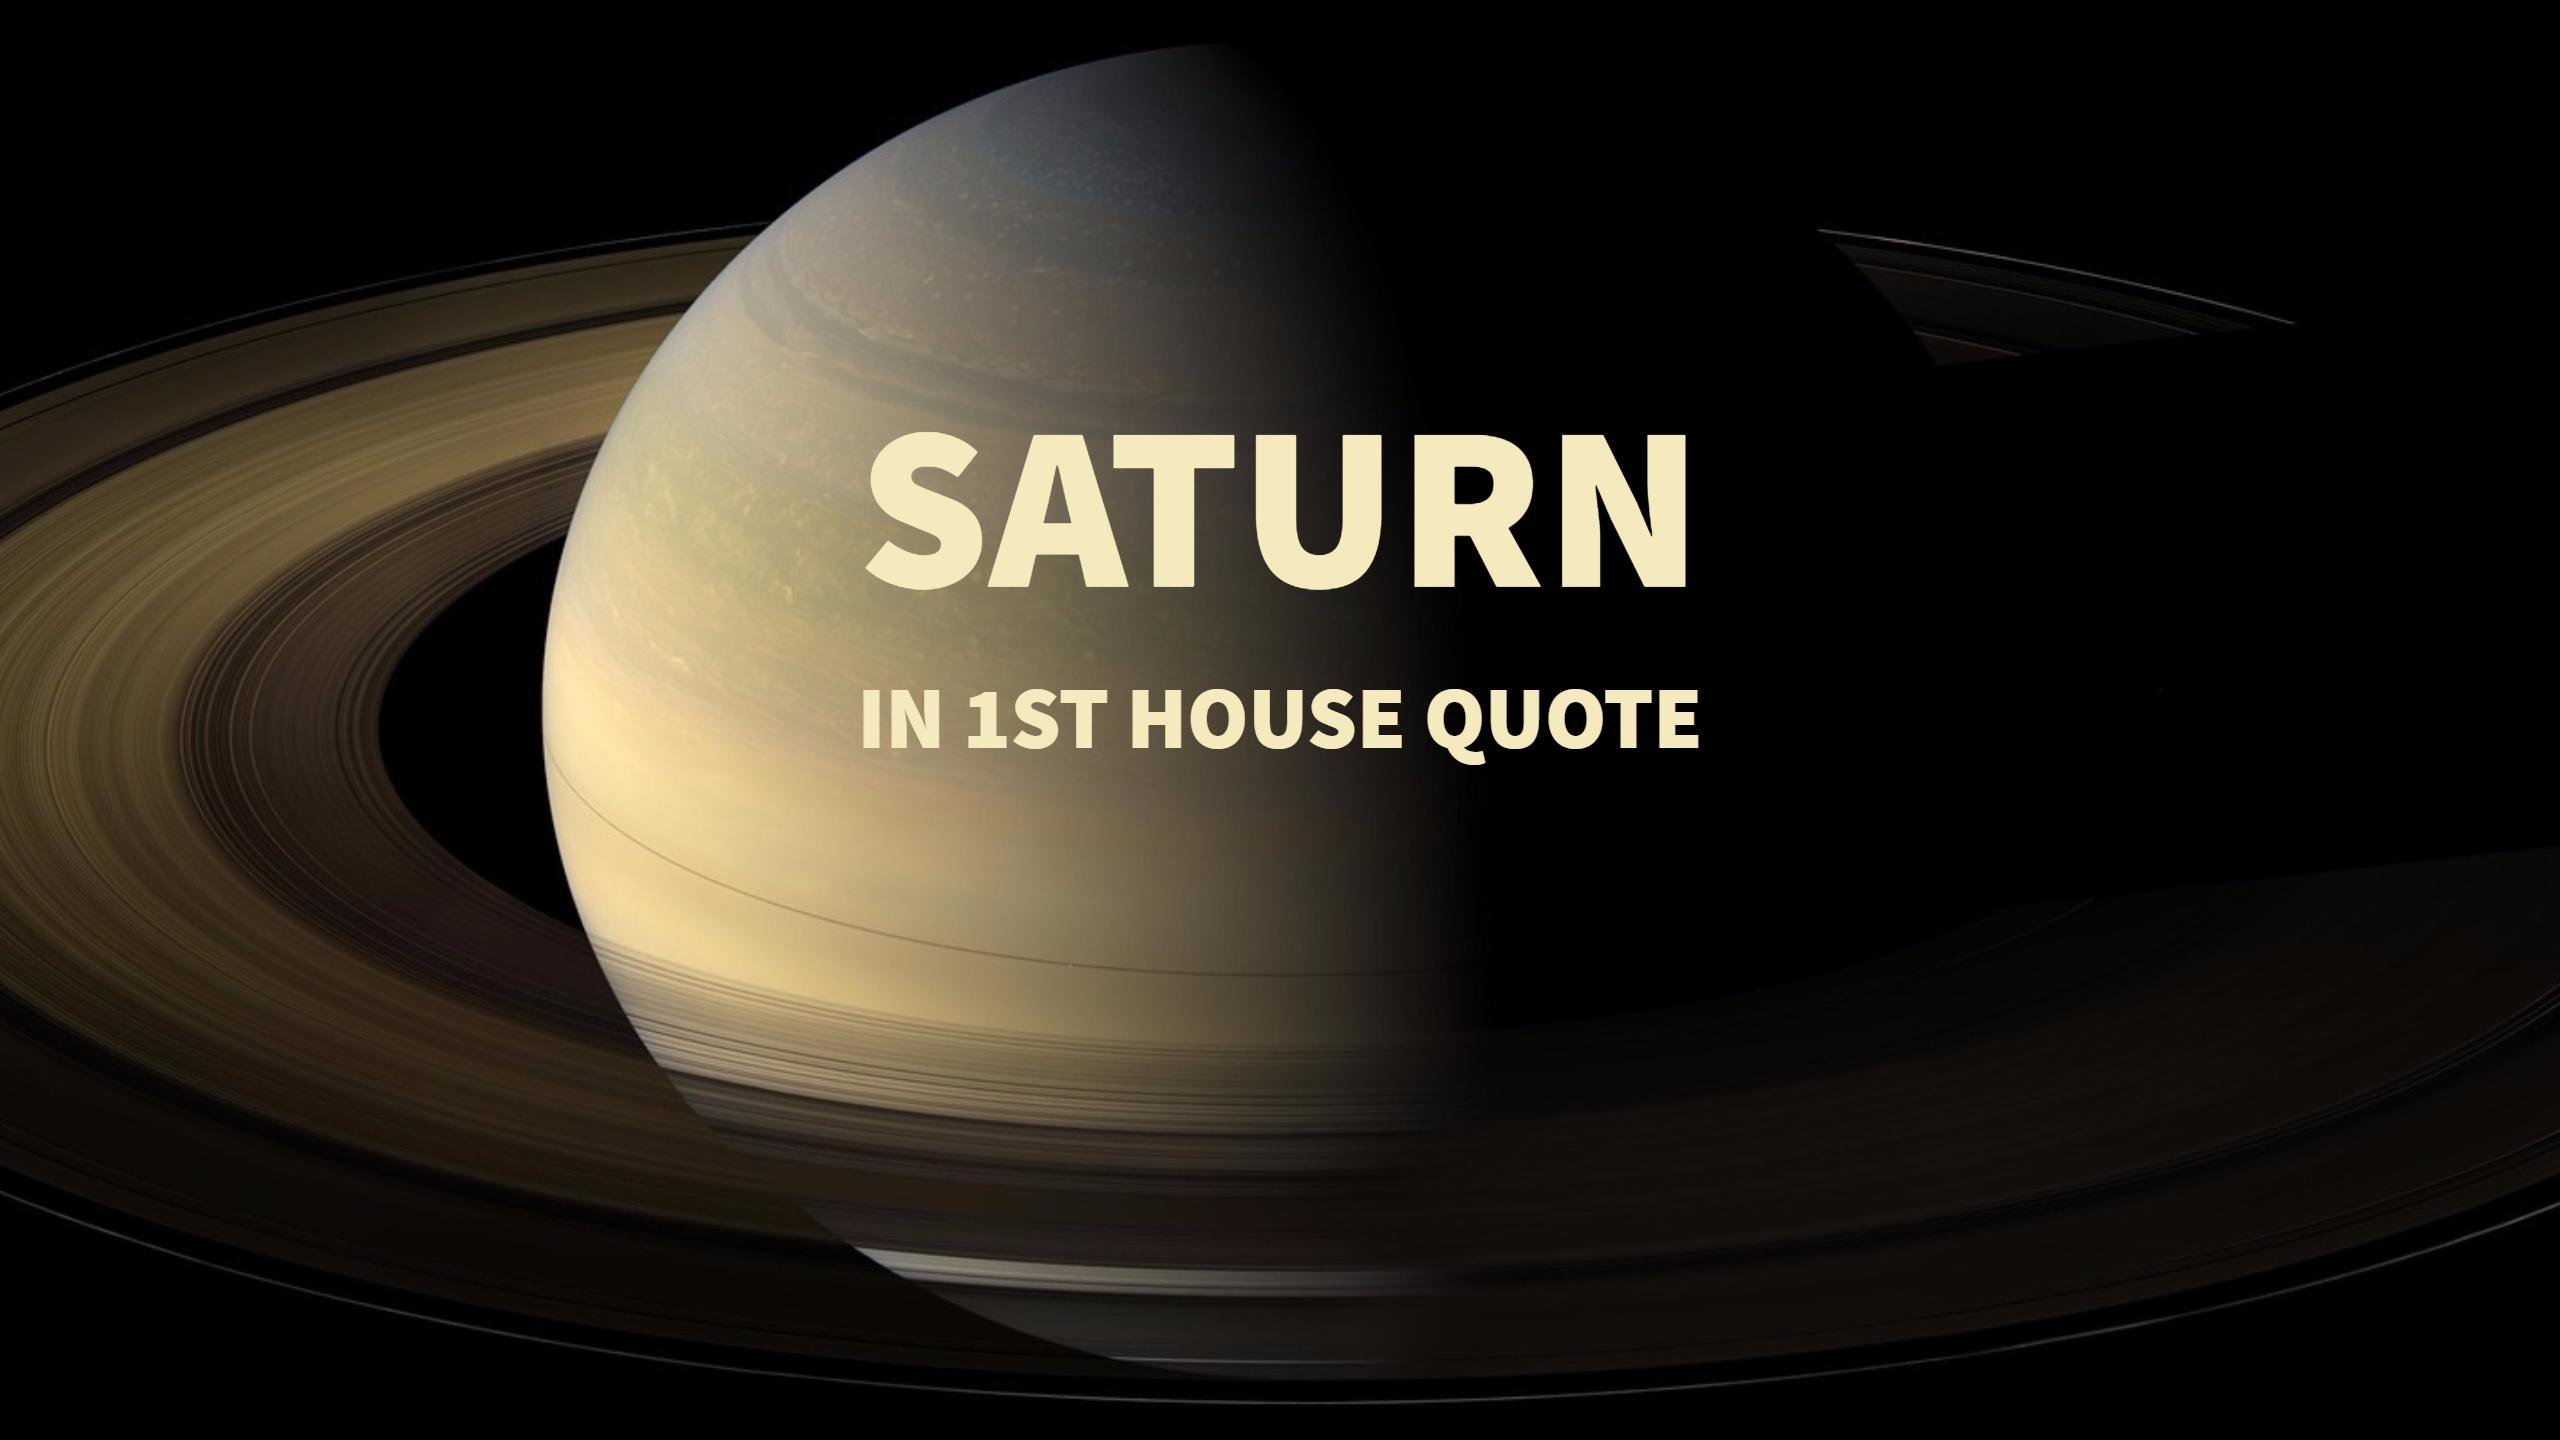 Saturn in 1st House Quote - Astro Manish Er